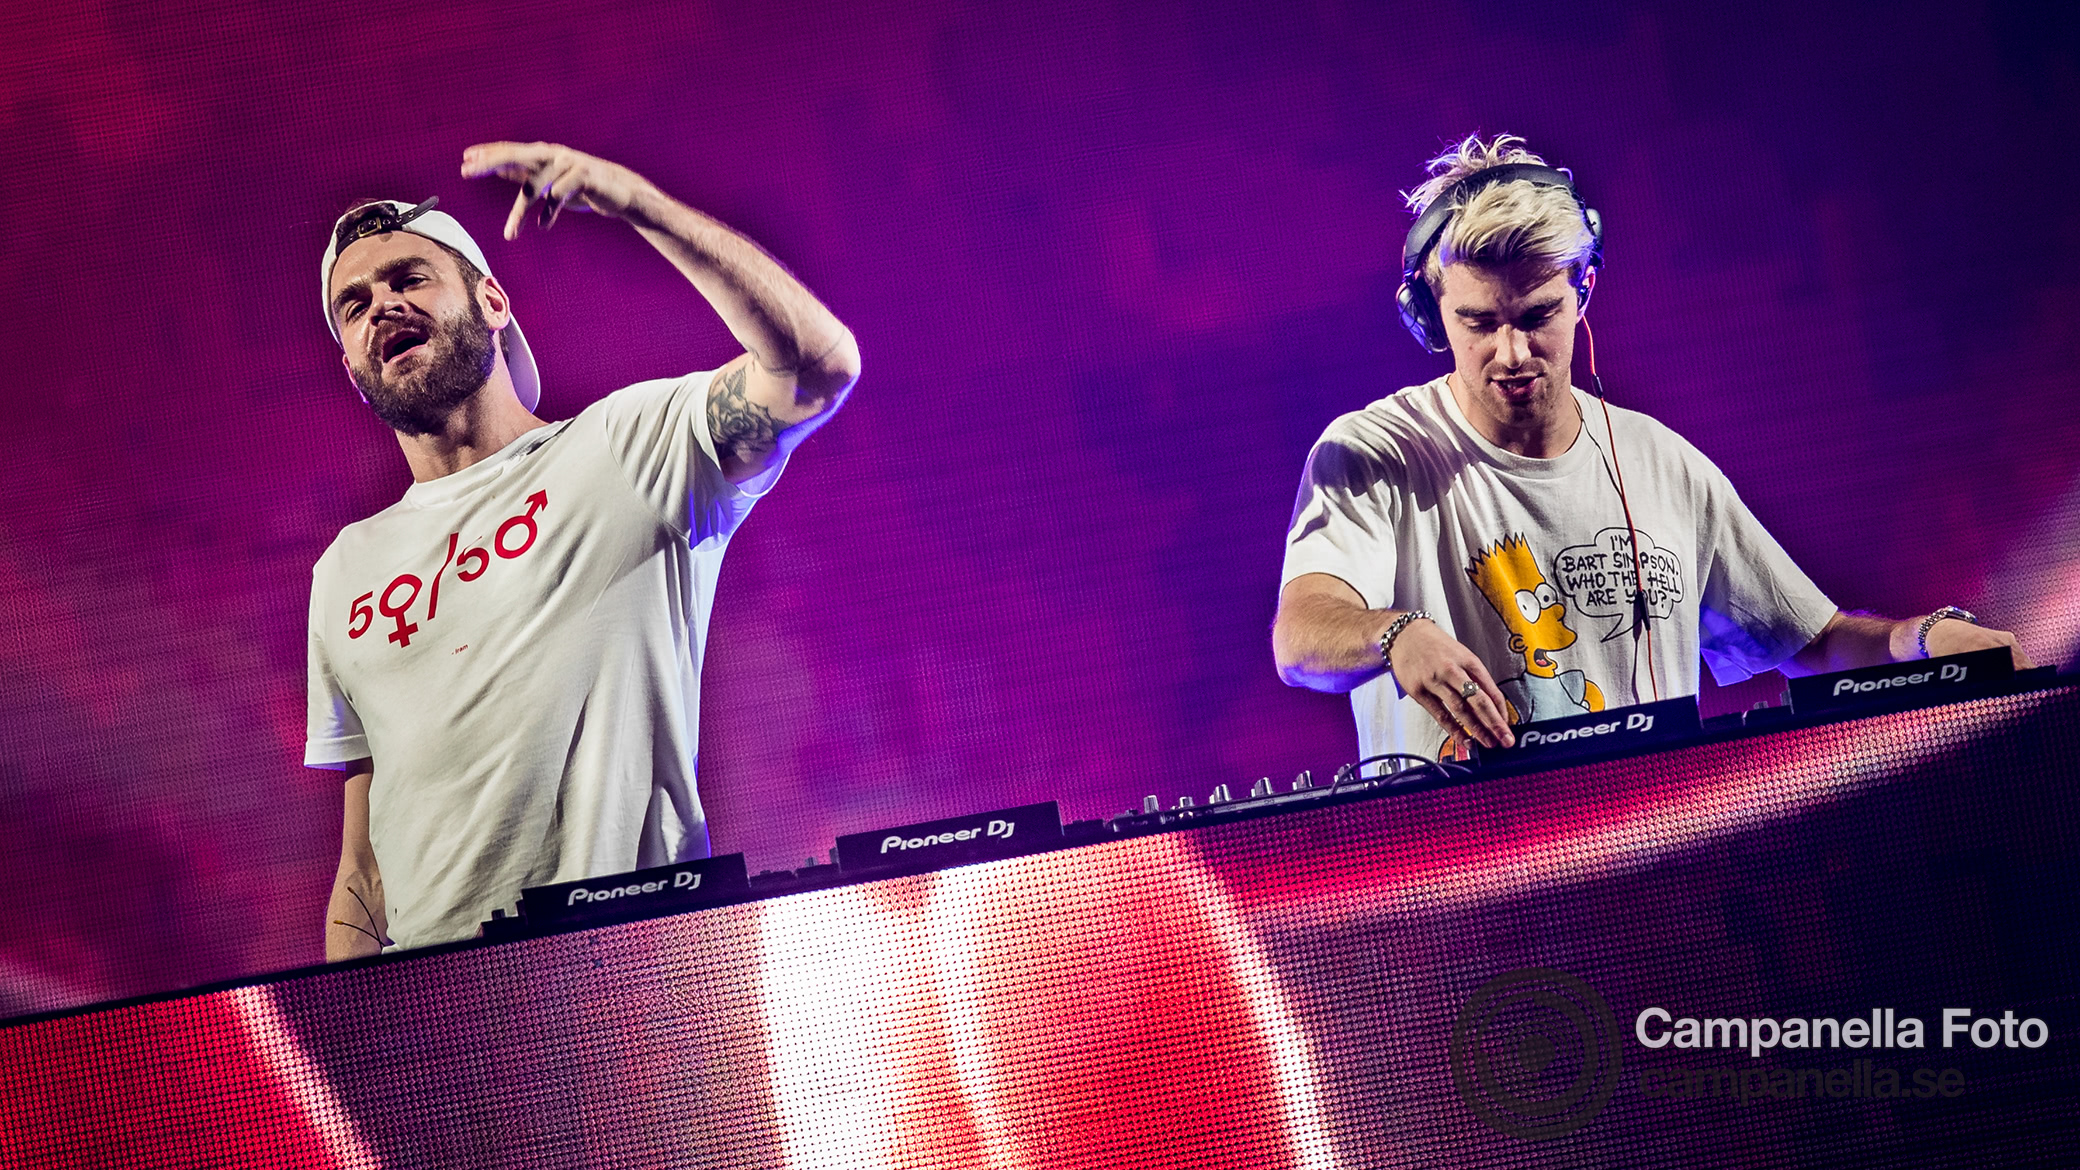 The Chainsmokers perform in Stockholm - Michael Campanella Photography